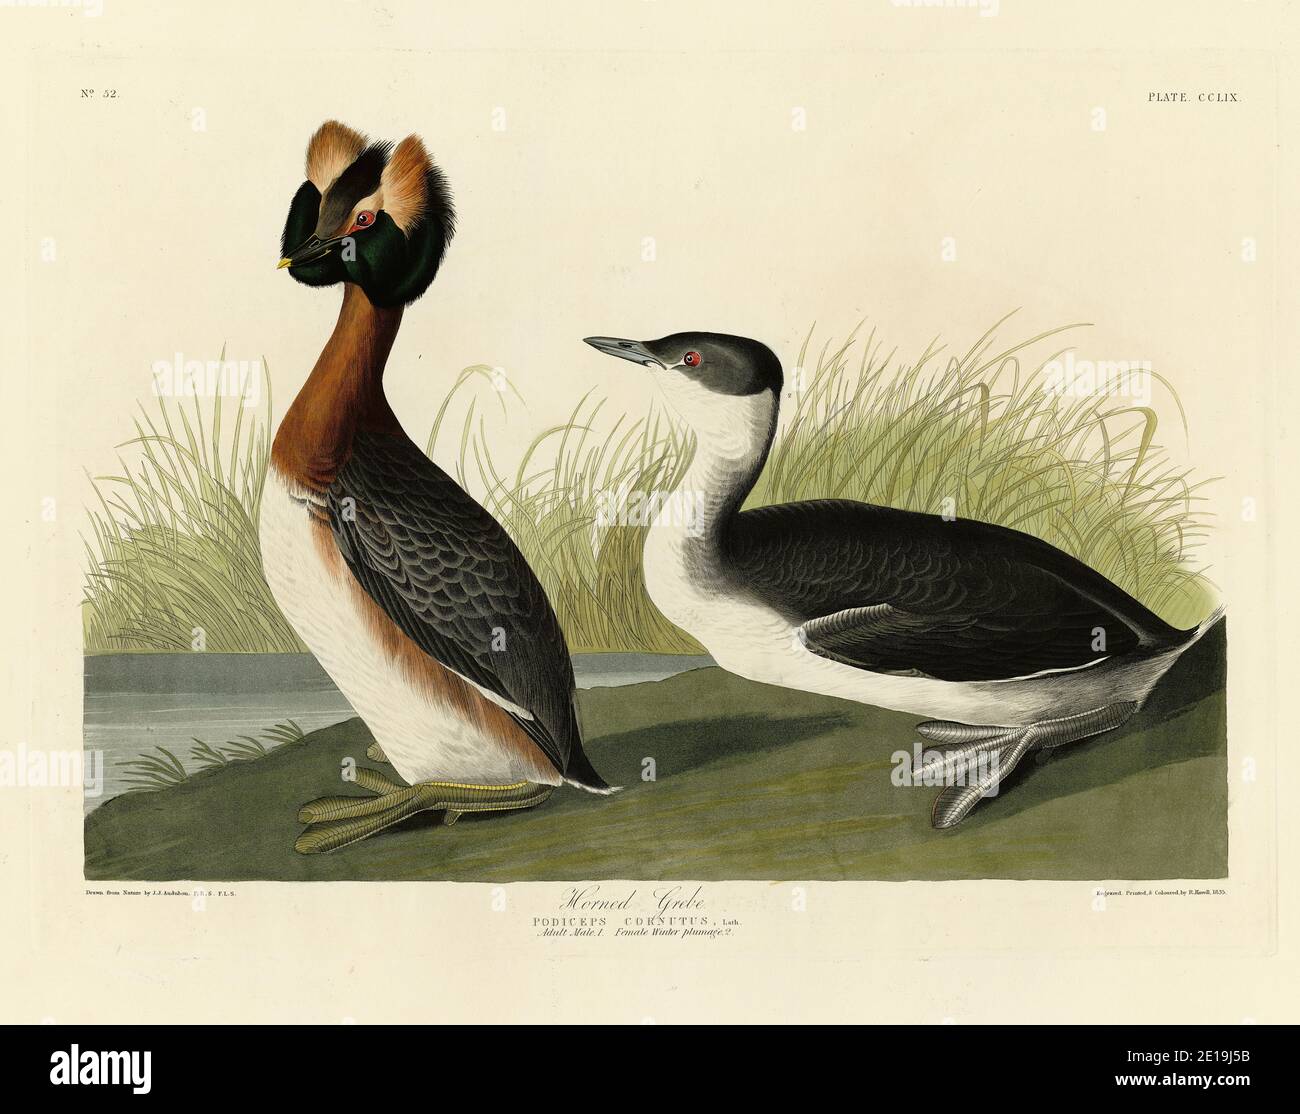 Plate 259 Horned Grebe from The Birds of America folio (1827–1839) by John James Audubon, Very high resolution and quality edited image Stock Photo